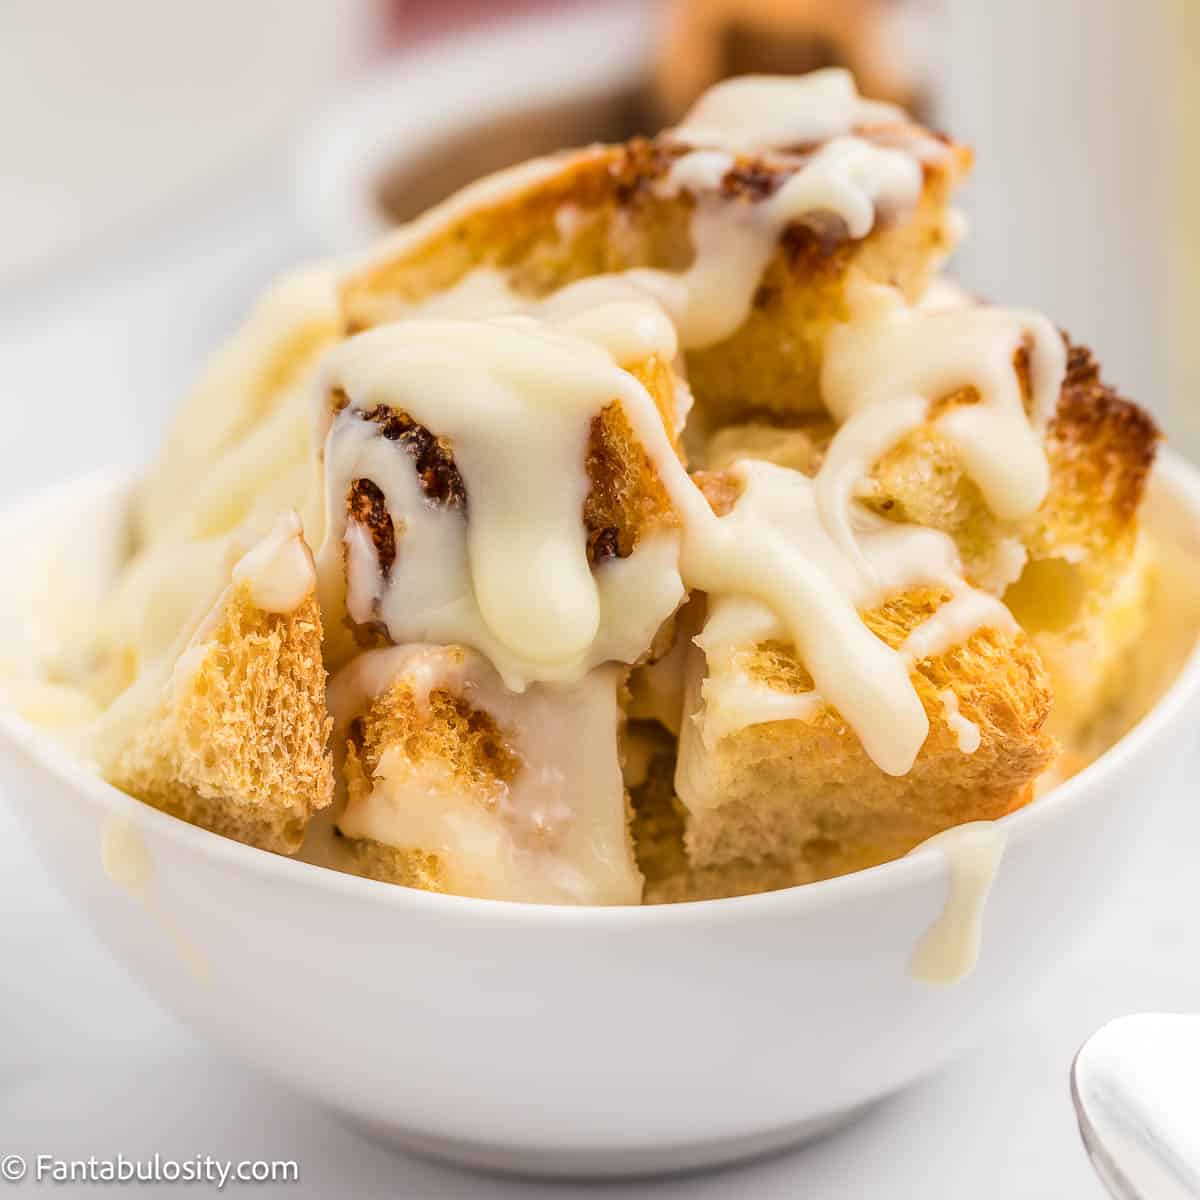 Vanilla sauce drizzled on to bread pudding, in a small white dish.